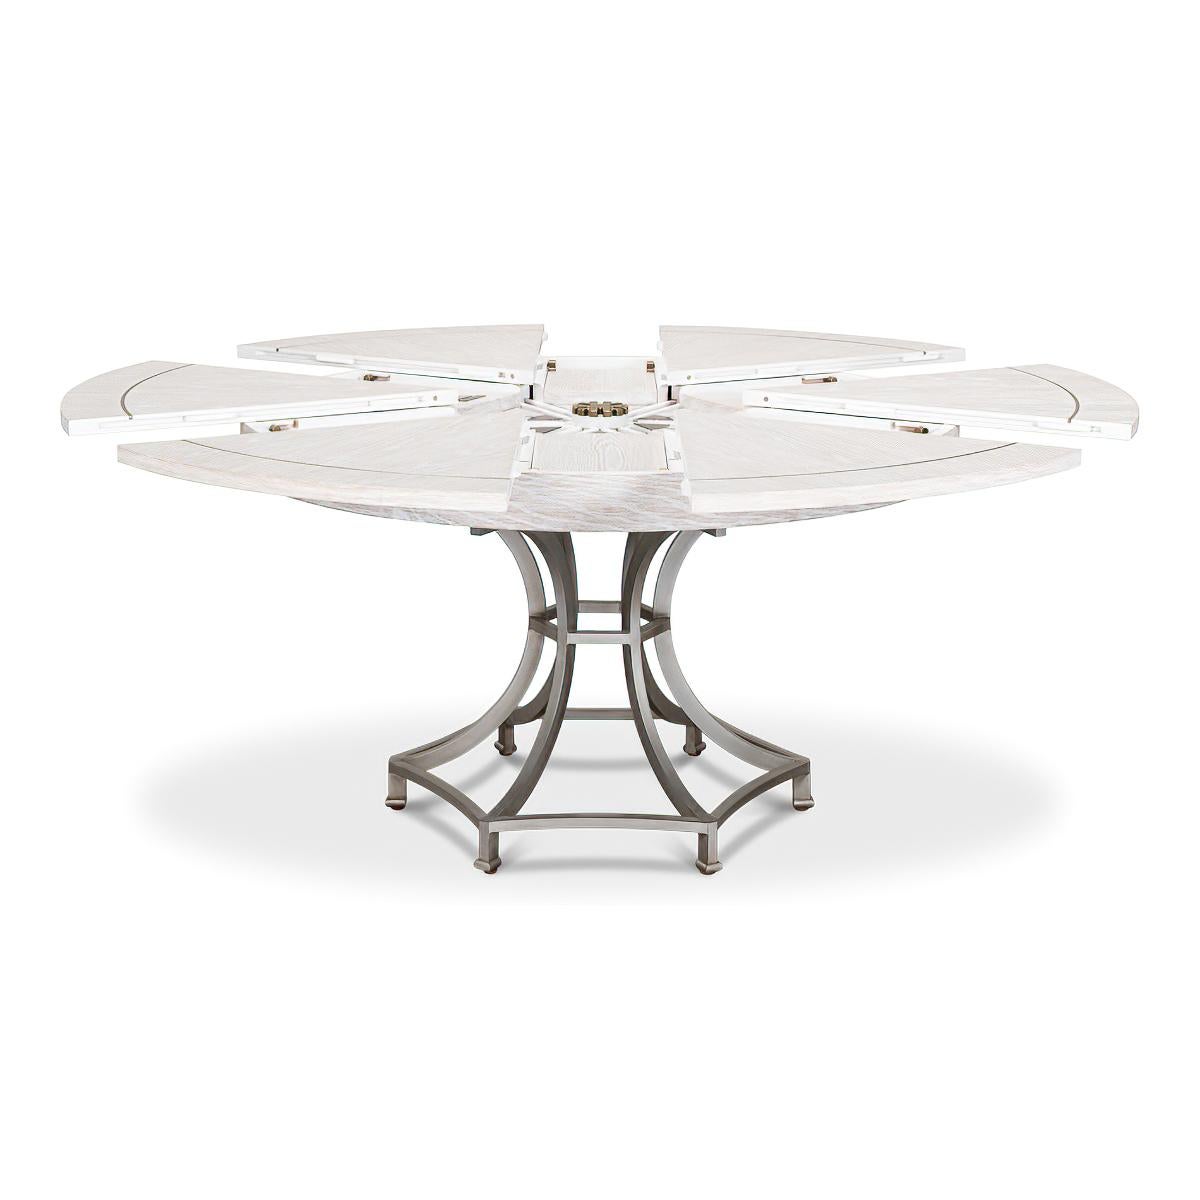 A Modern Industrial style round extending dining table. Featuring a modern white wash finish top with gunmetal inlays on a metal pedestal column base.

Open dimensions: 70